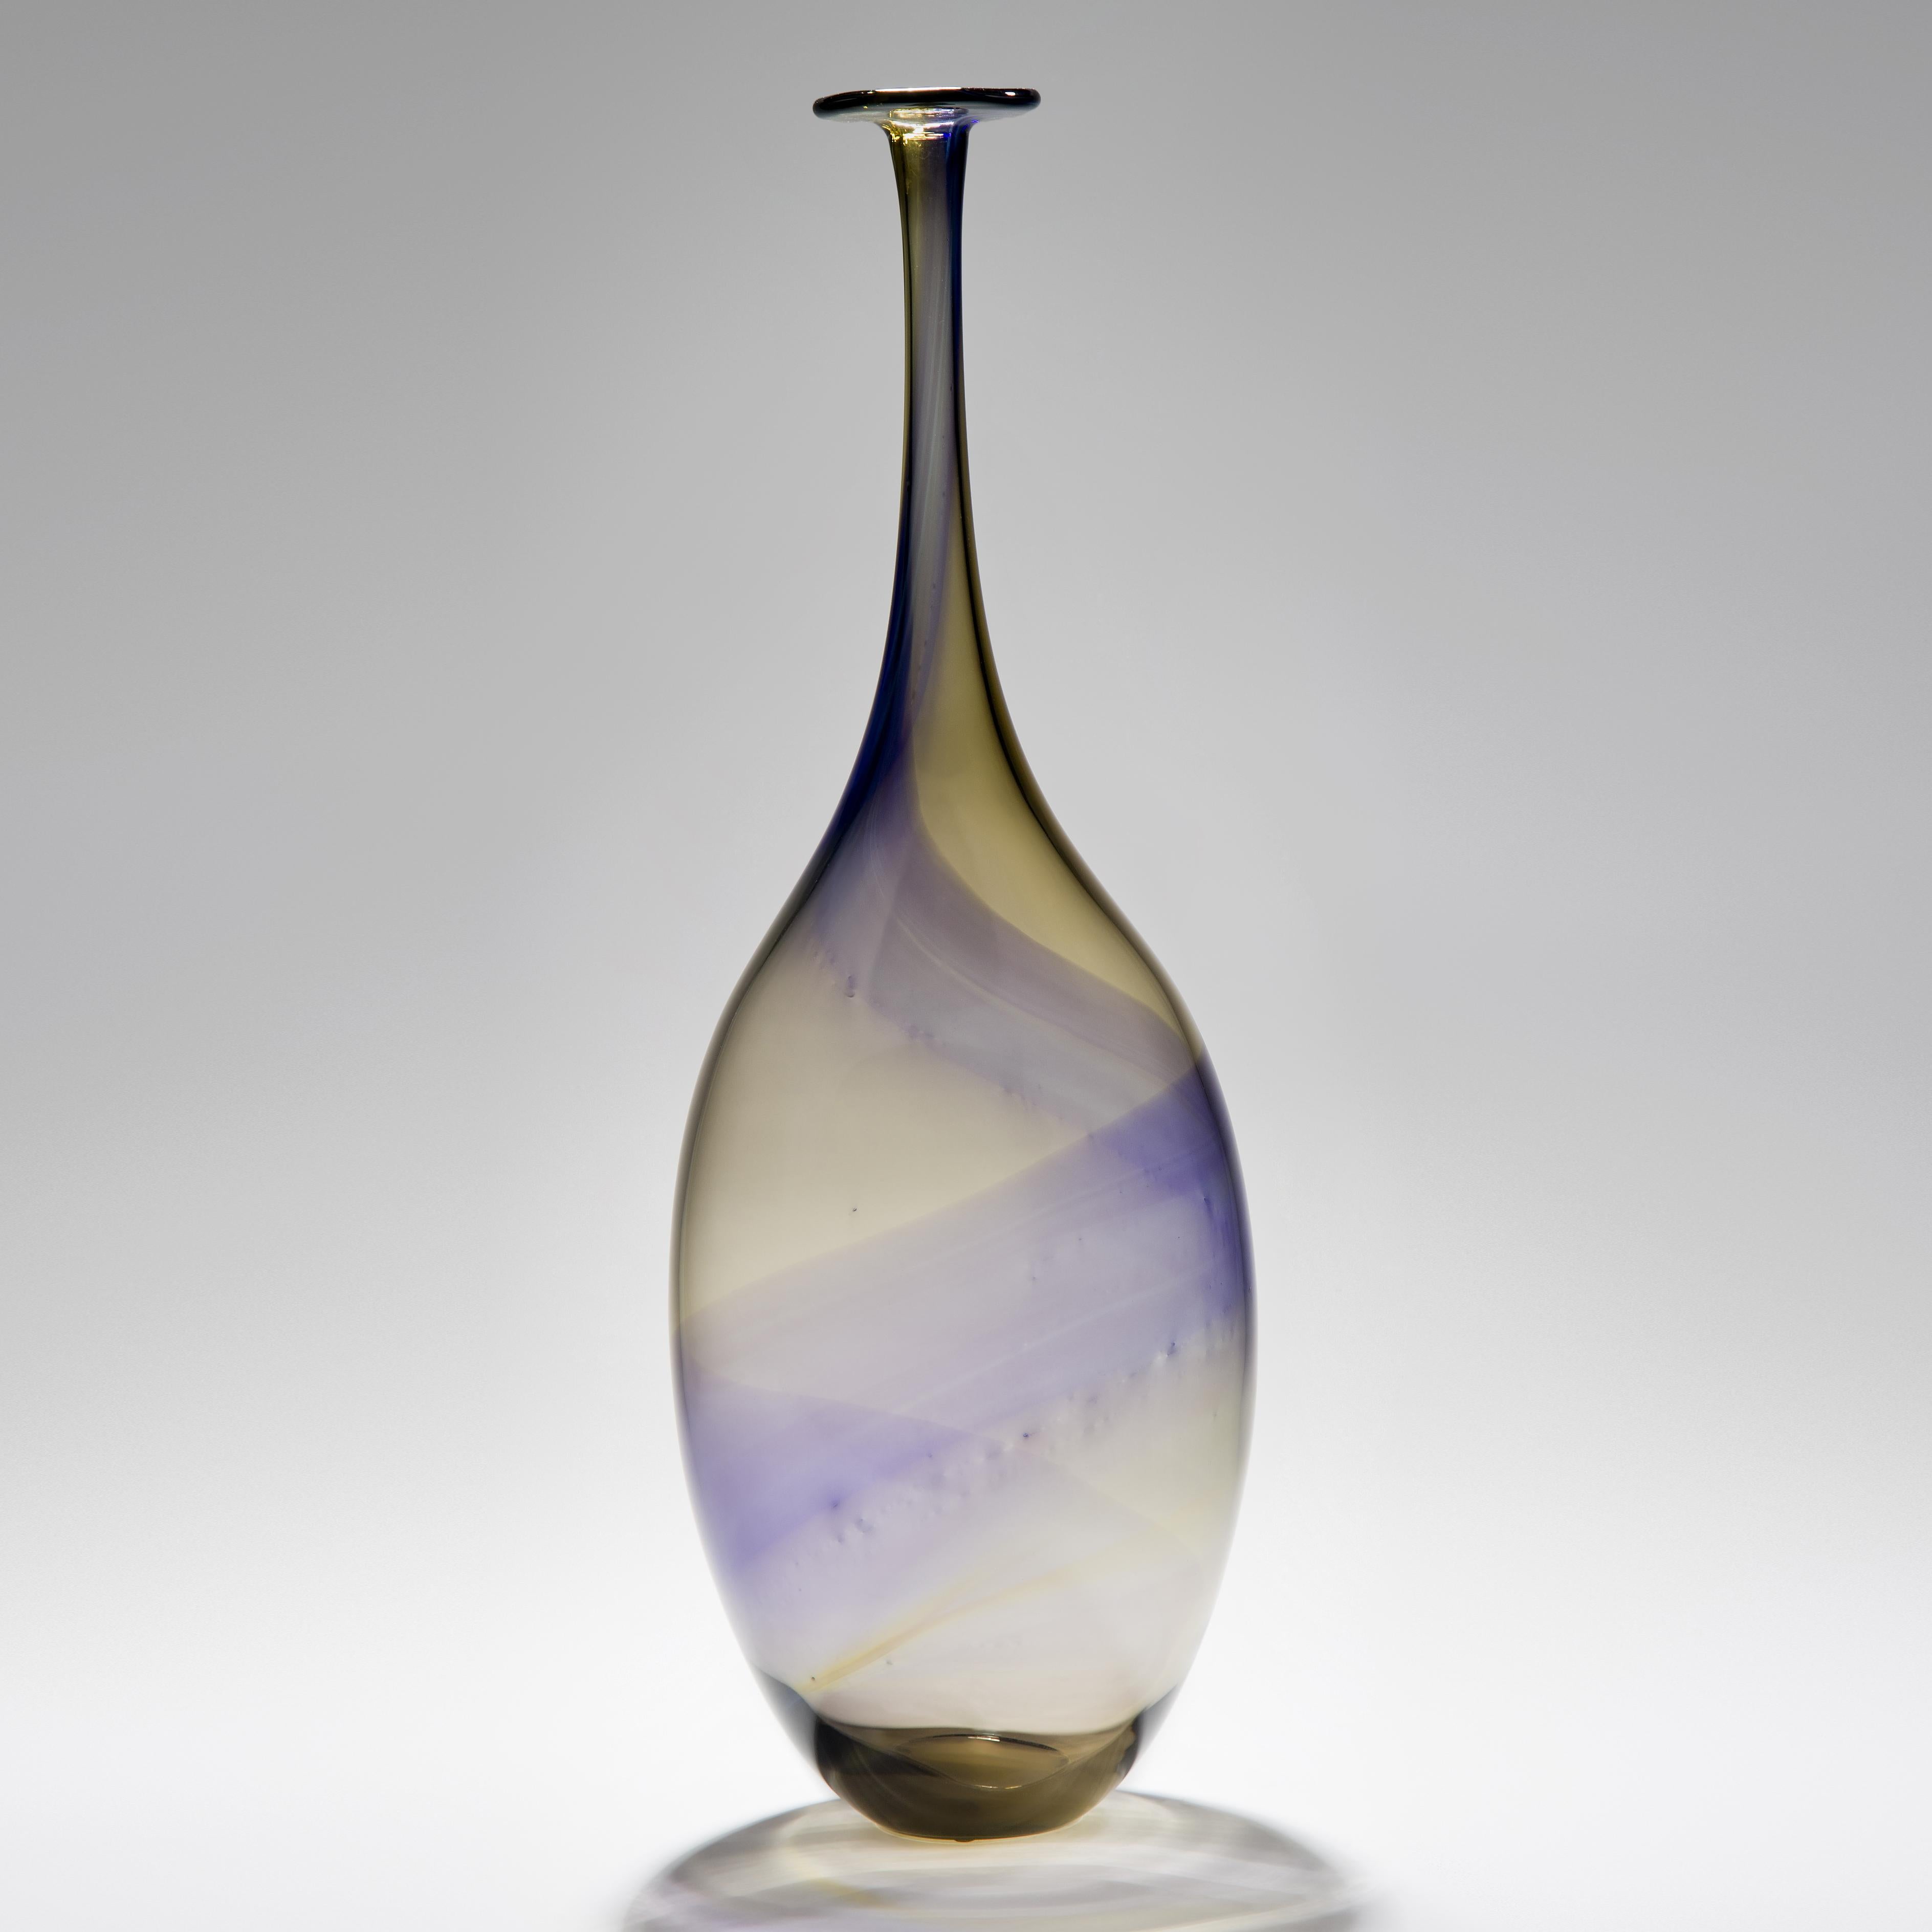 Fidji III is a unique bronze & purple sculptural tall bottle, by the Swedish artist Kjell Engman for Kosta Boda.

The Fidji series was inspired when Engman accidentally spilled oil into water. Remaining on the water's surface, the oil floated and